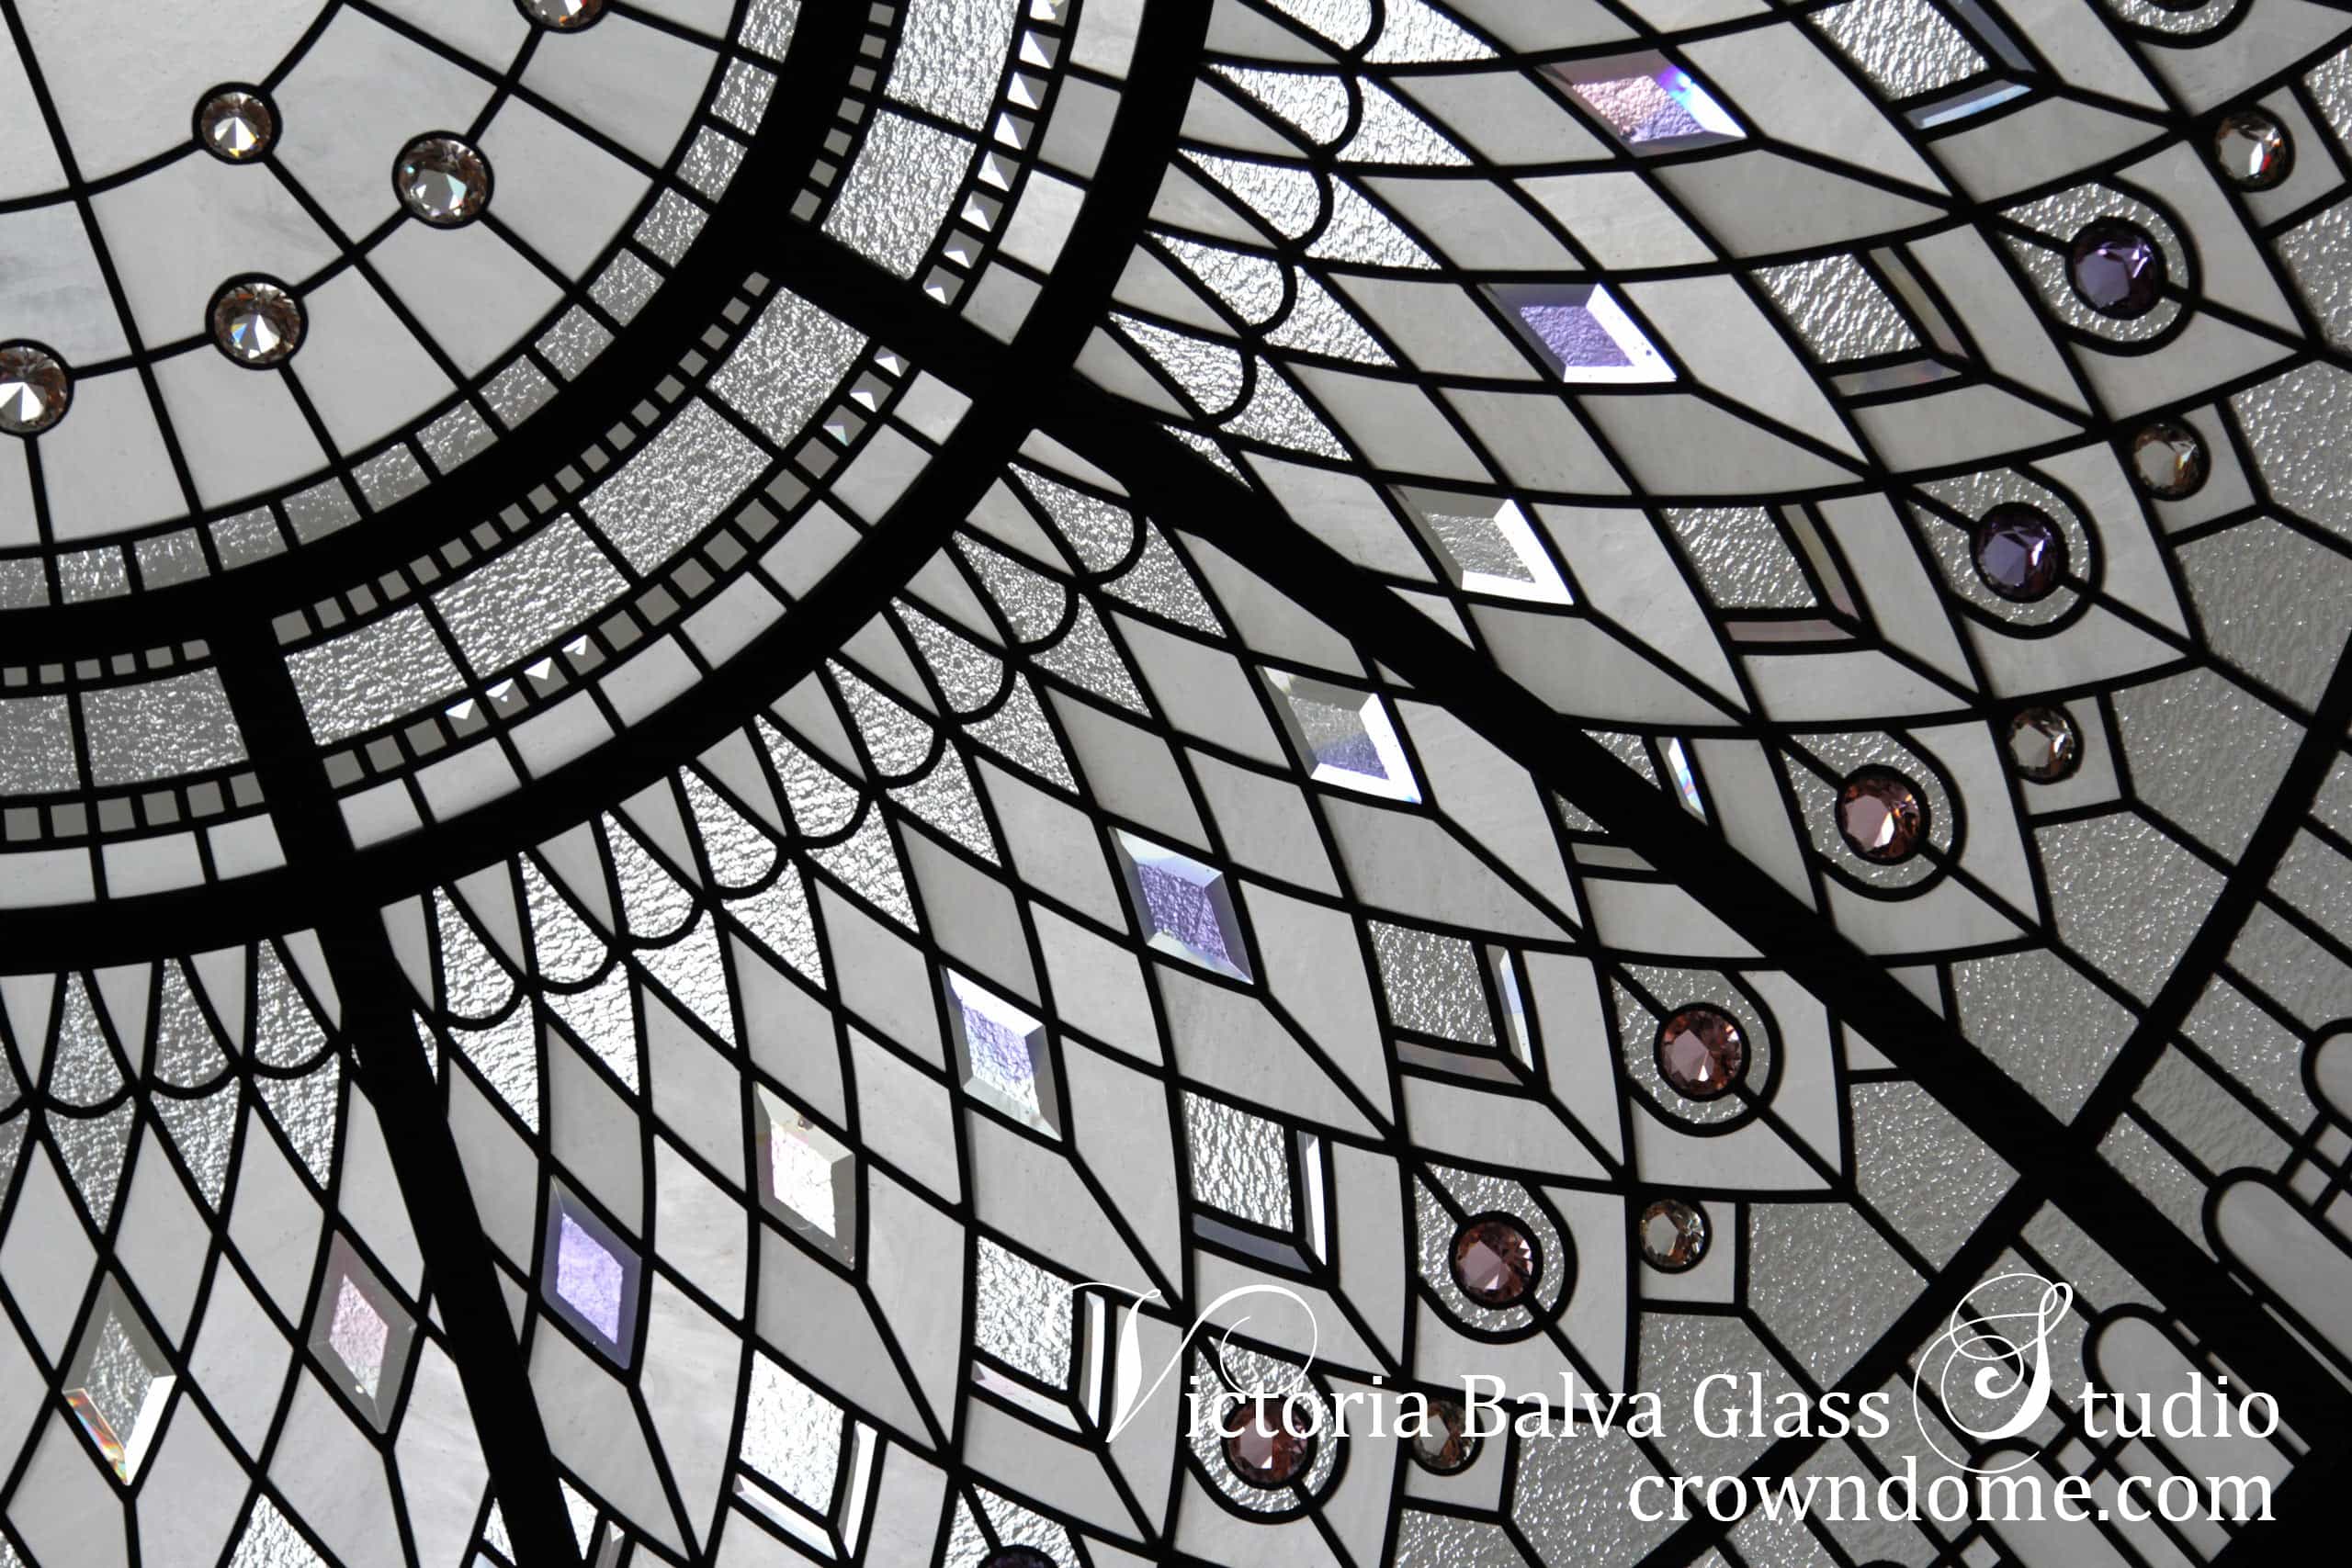 Large custom-made stained leaded glass domed skylight with beveled glass diamonds & crystal colored jewel accents for the interior design of luxury custom built residence in New York. Clear textured glass colored custom made beveled glass, classical ornamental border design. Large residential skylight design by glass artist Victoria Balva